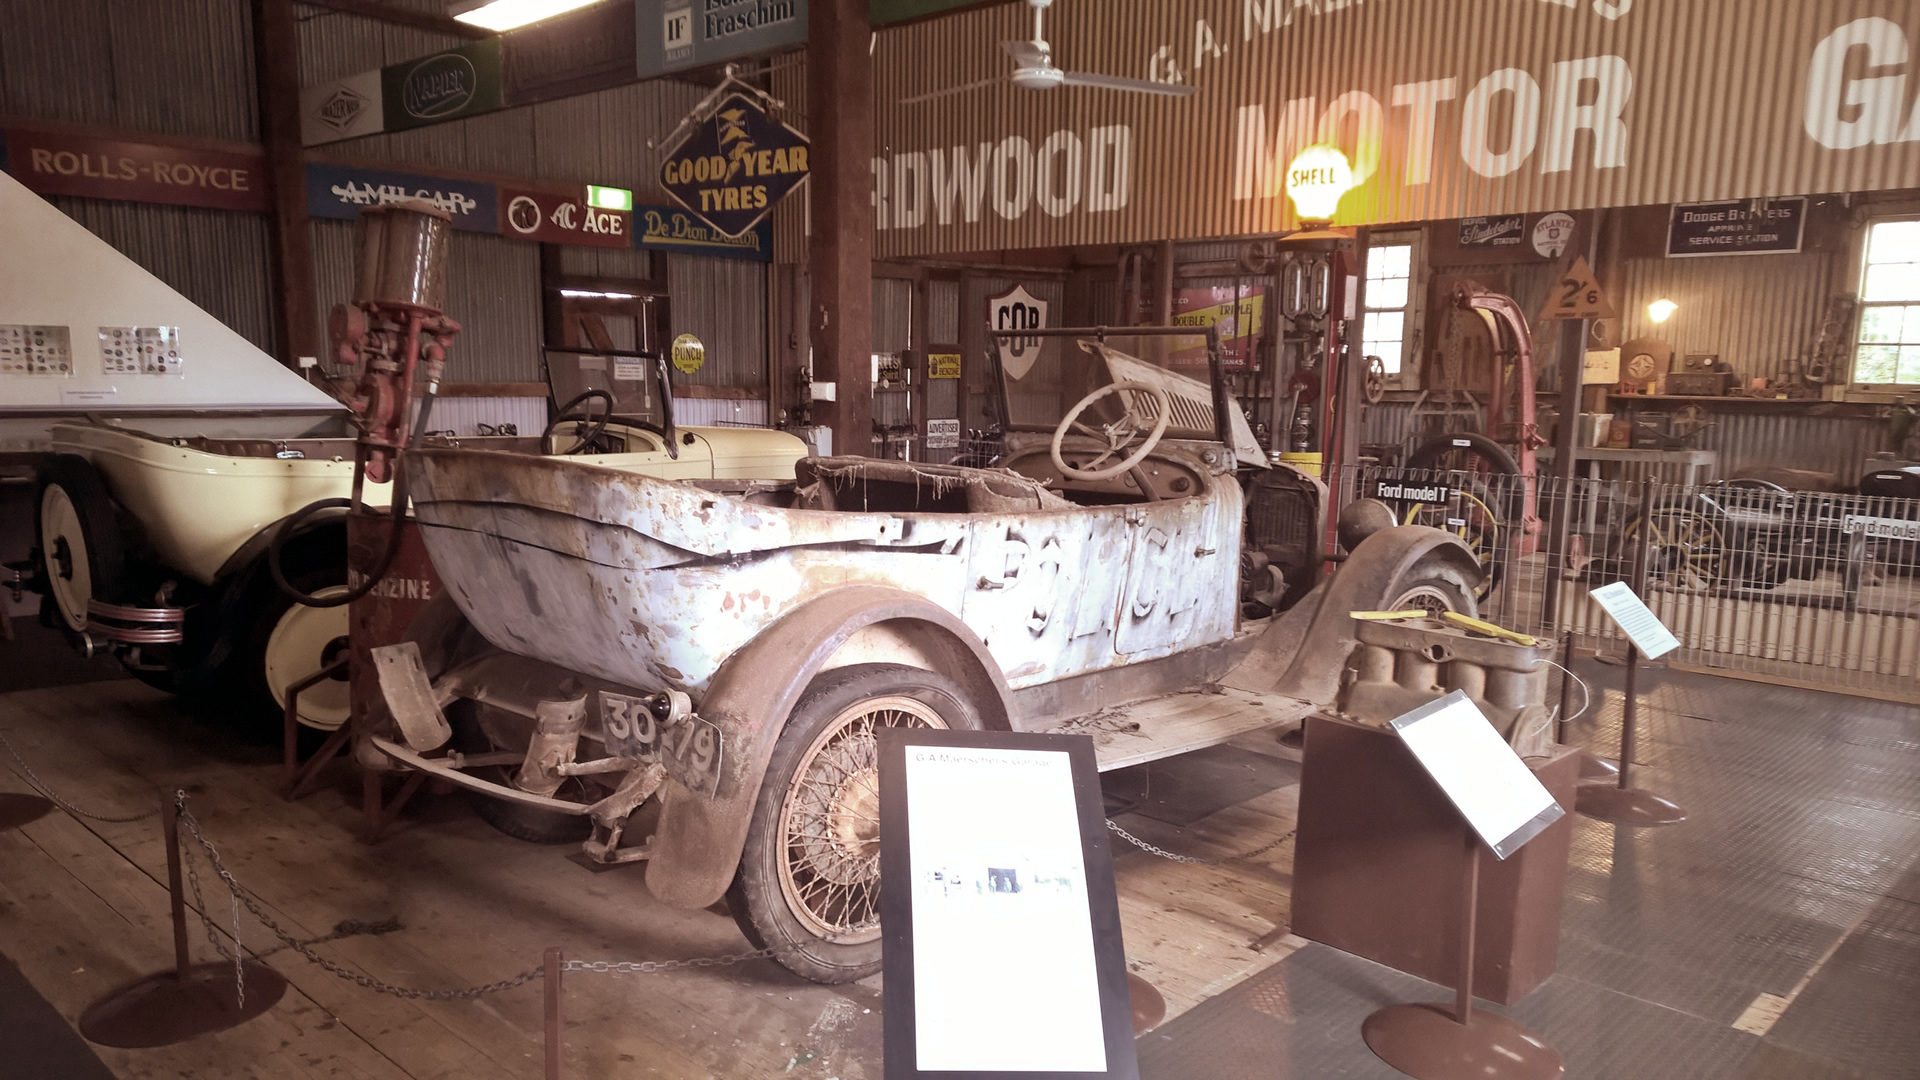 The National Motor Museum, Birdwood, South Australia: A journey of discovery